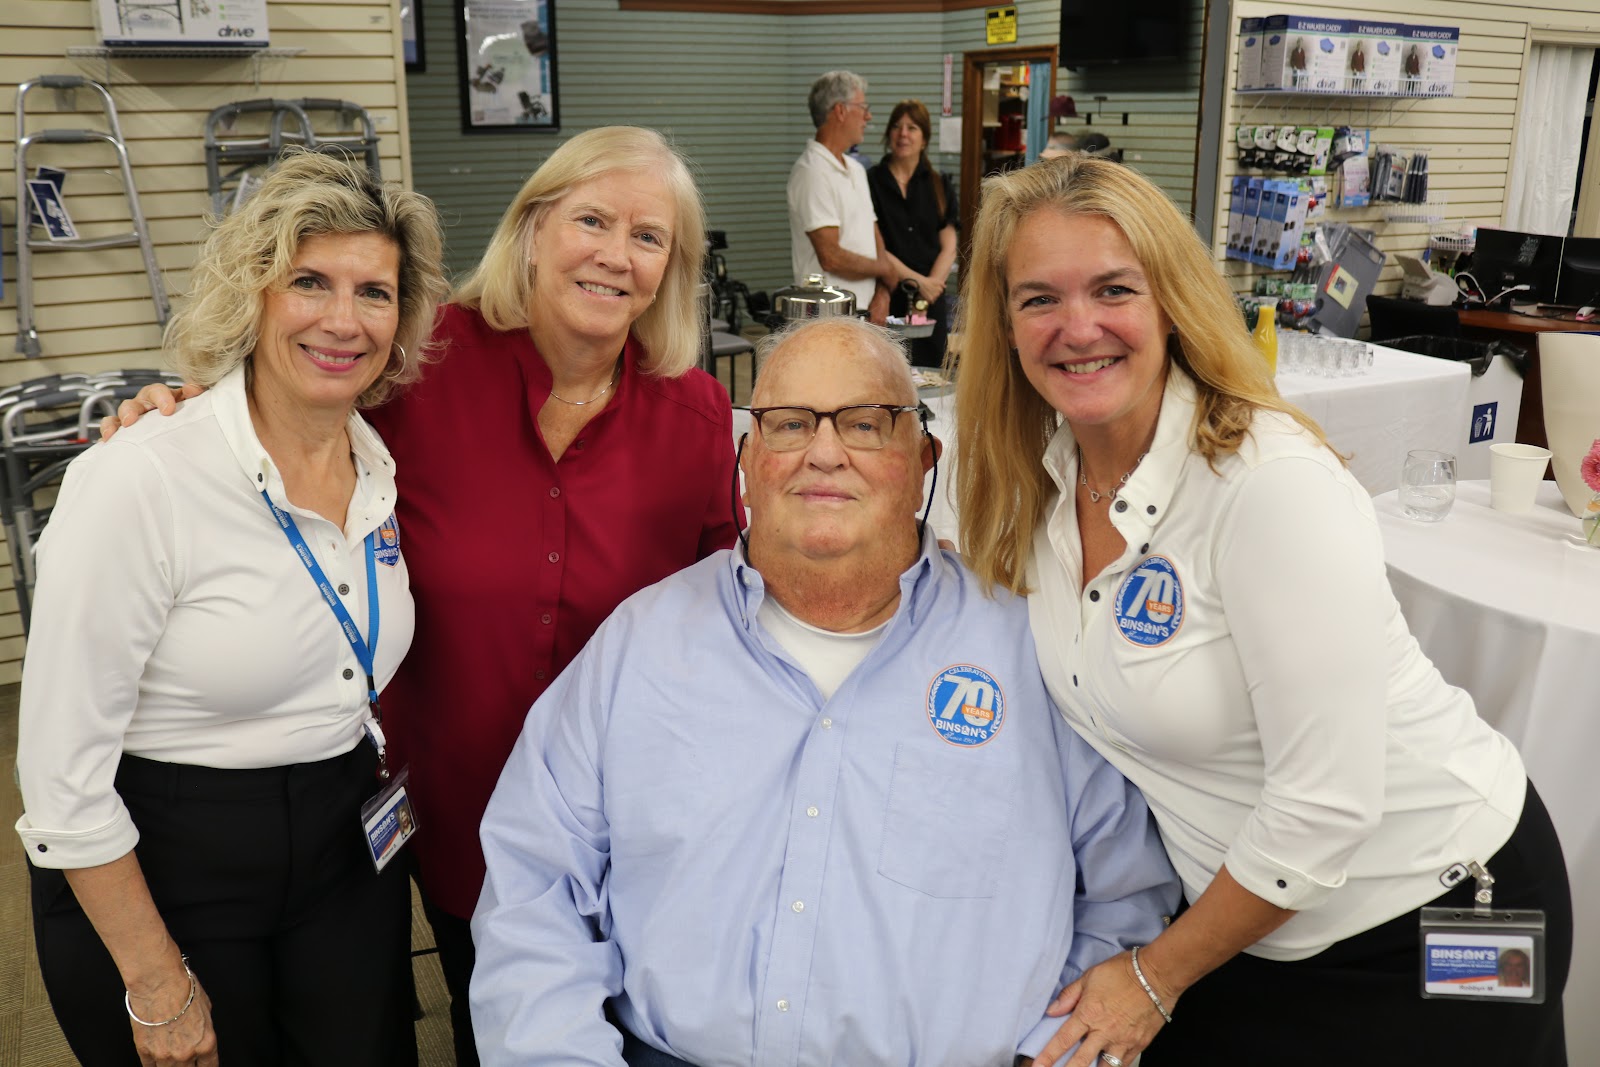 Pictured Left to Right: Roseann Barretta: Executive Assistant, Candice Miller: Public Works commissioner, James E. Binson: Board of Directors Chairman, Robbyn Martin: Compliance Director